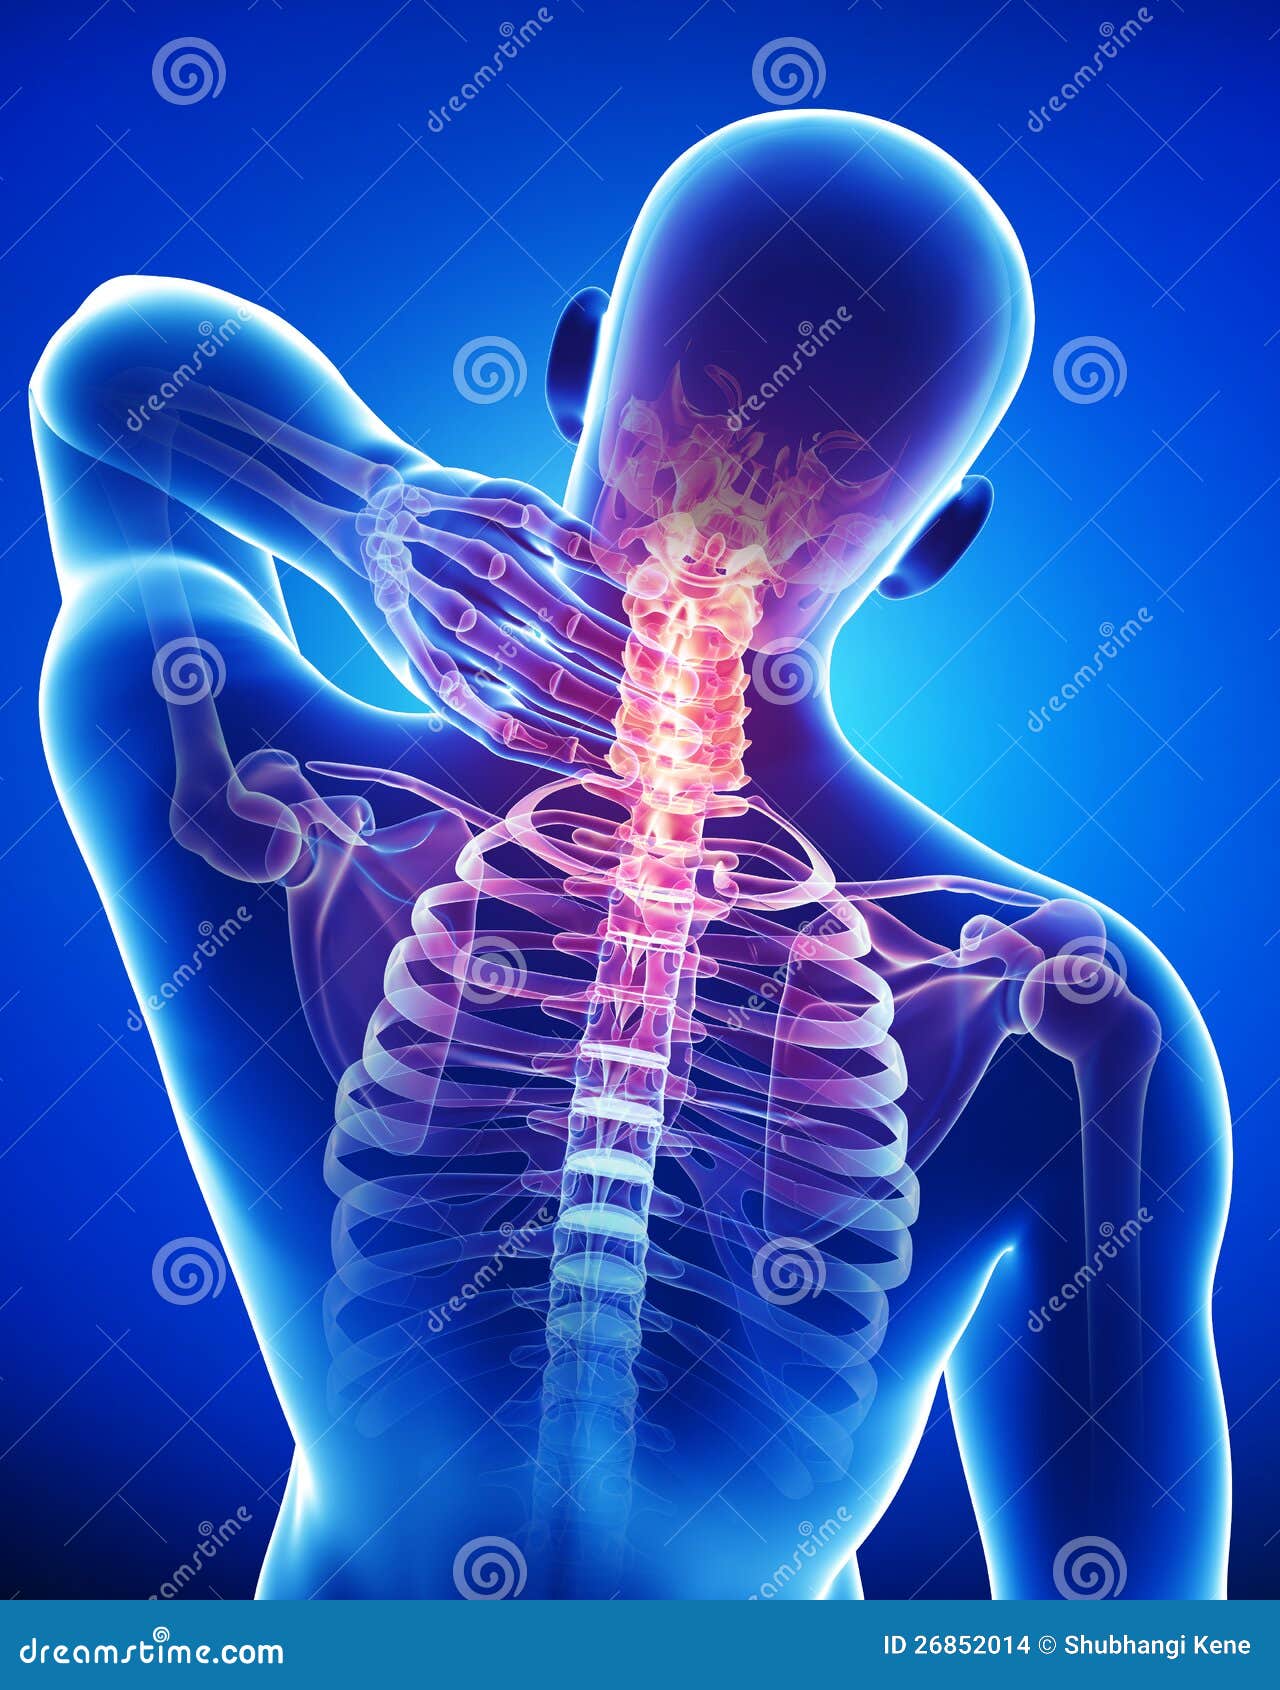 anatomy of male back and neck pain in blue